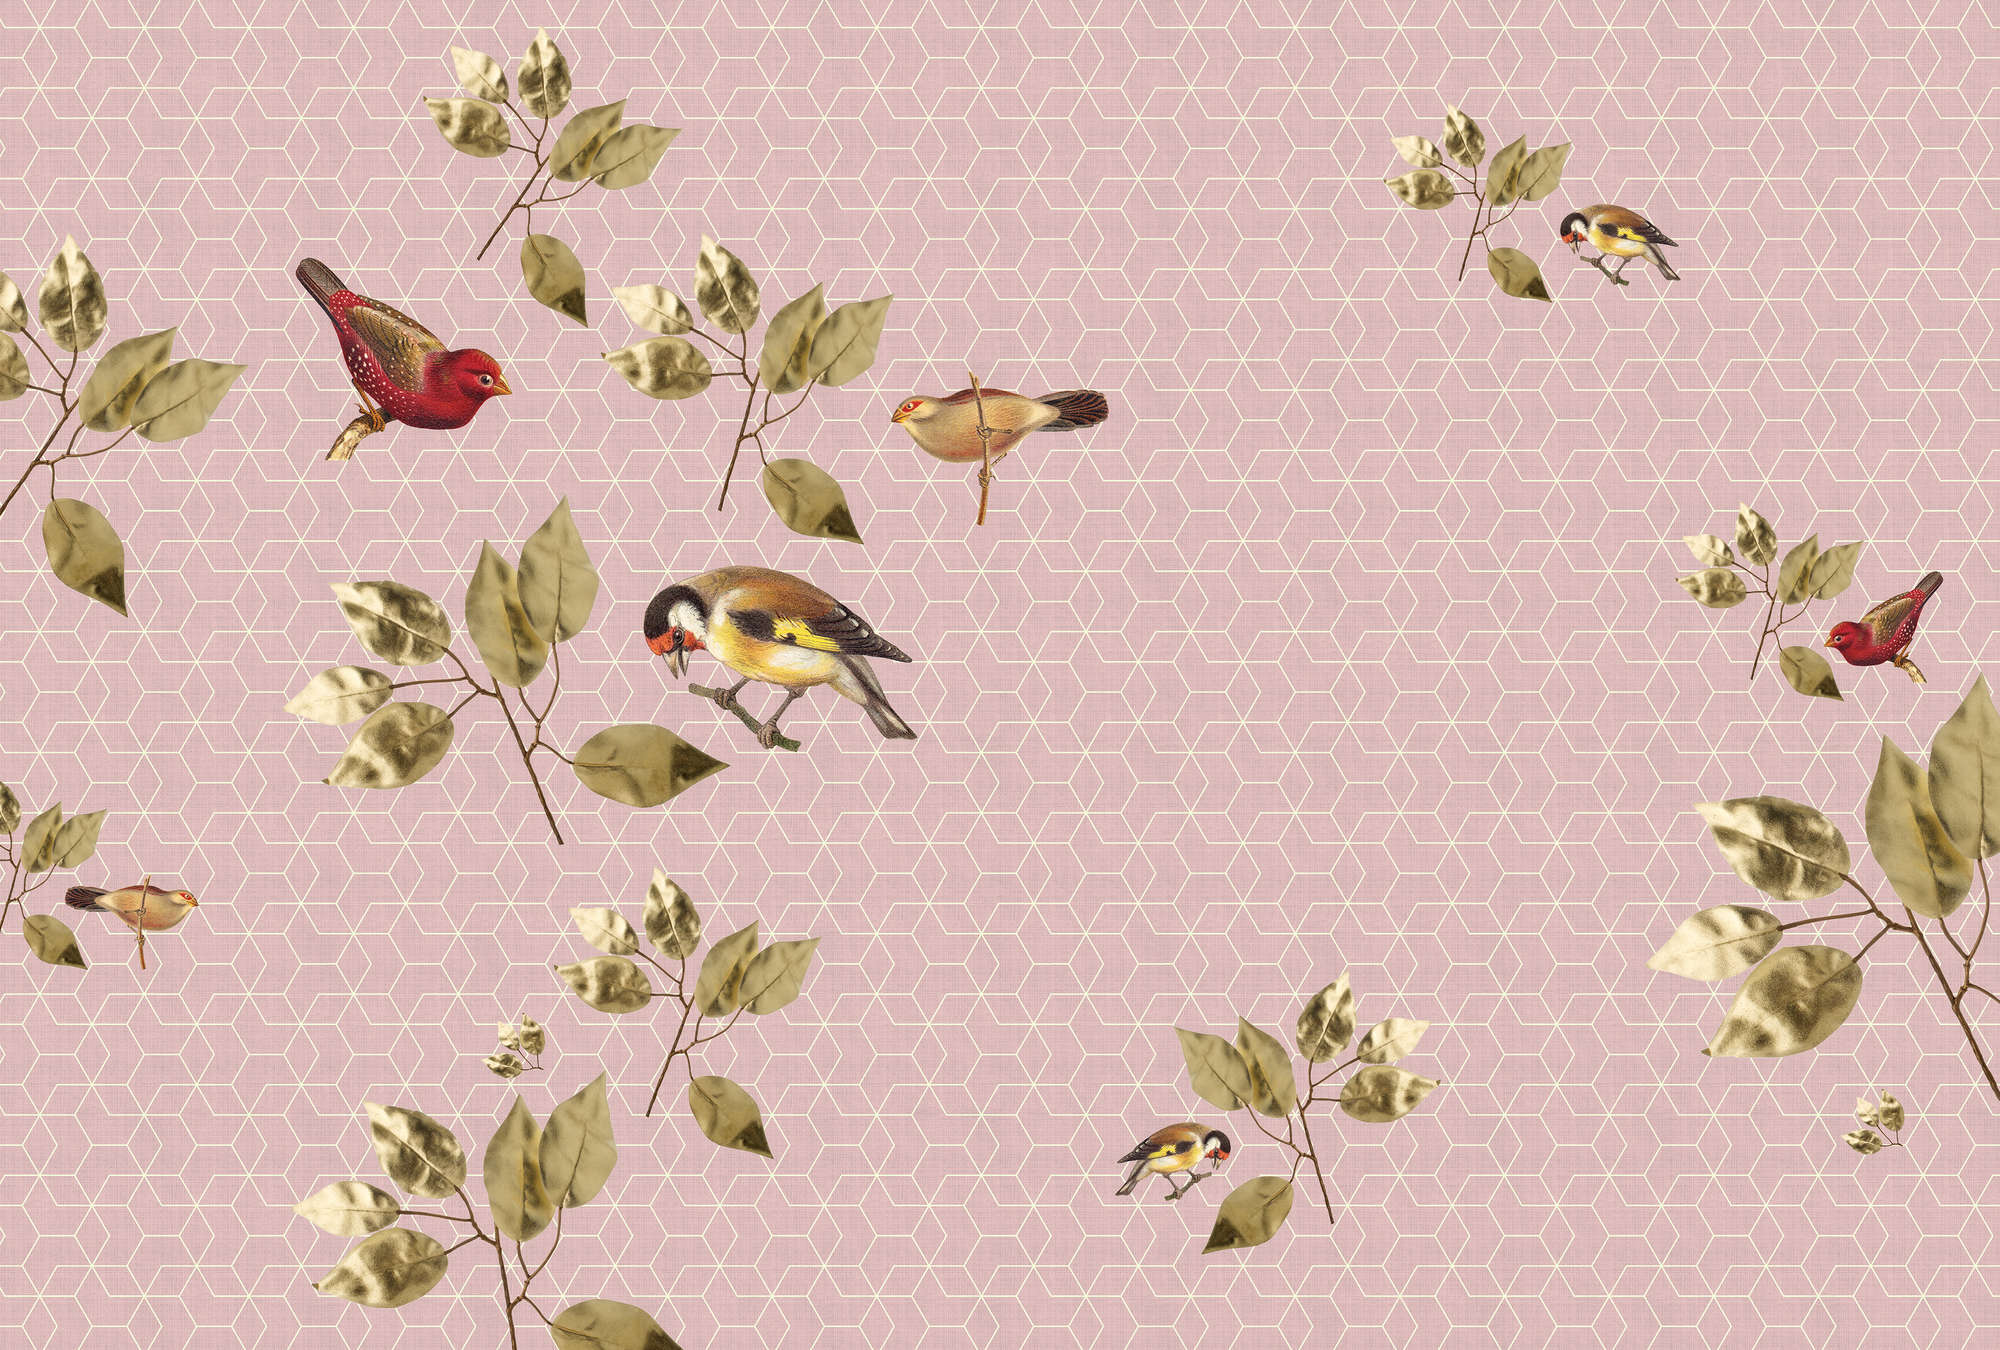             Brilliant Birds 1 - Geometric Wallpaper with Birds & Leaves Pattern - Green, Pink | Premium Smooth Non-woven
        